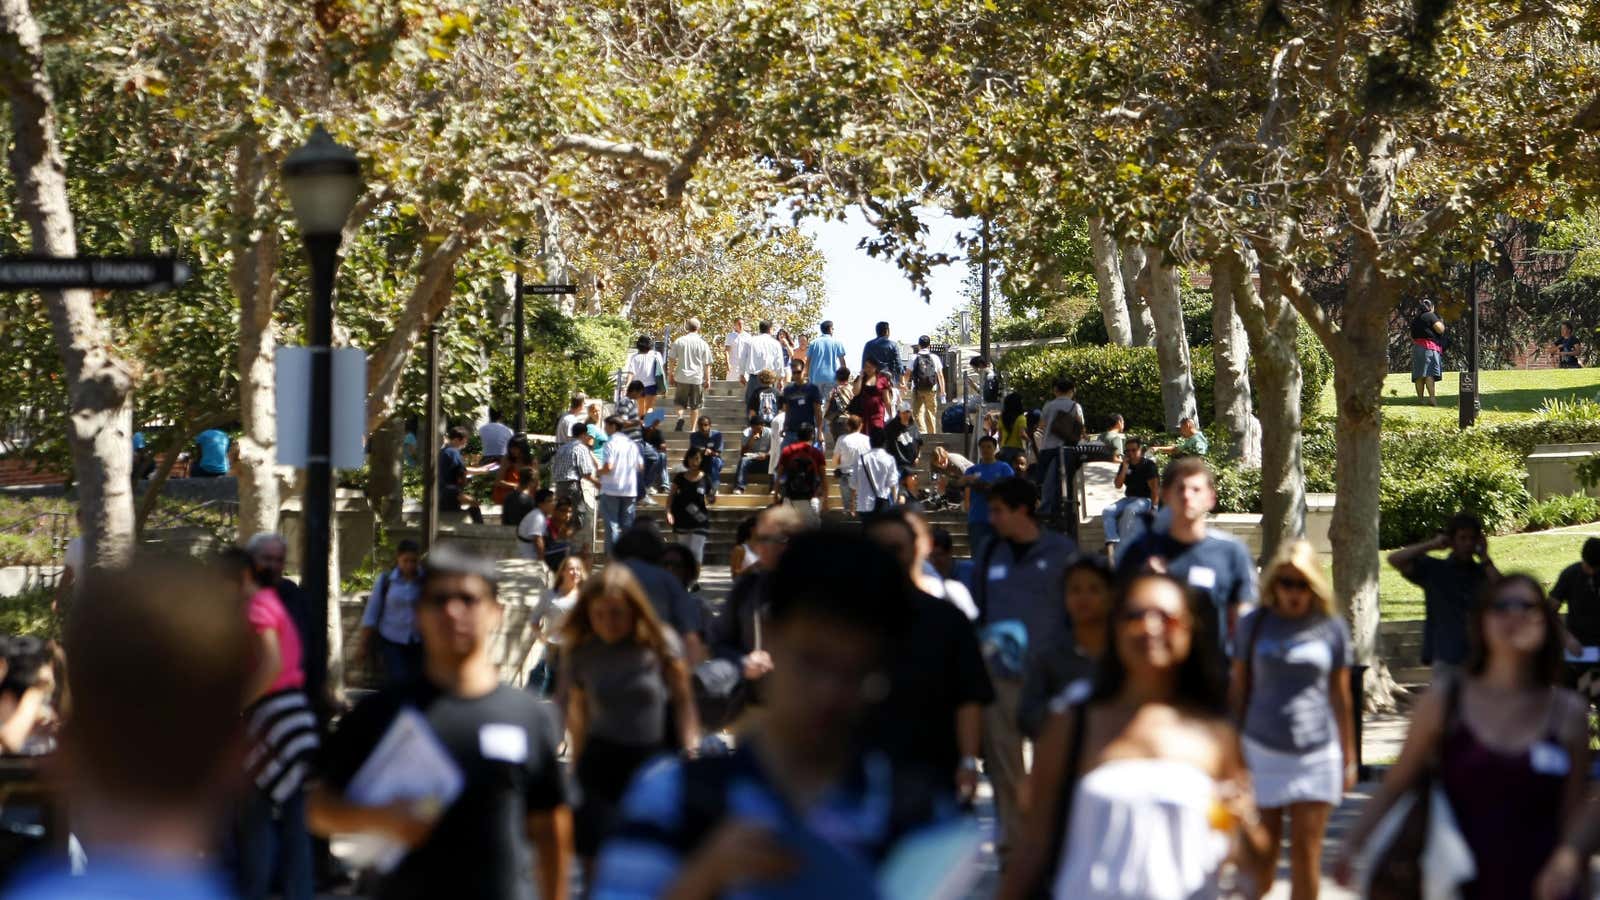 Should colleges expect fewer undergrads in the future?